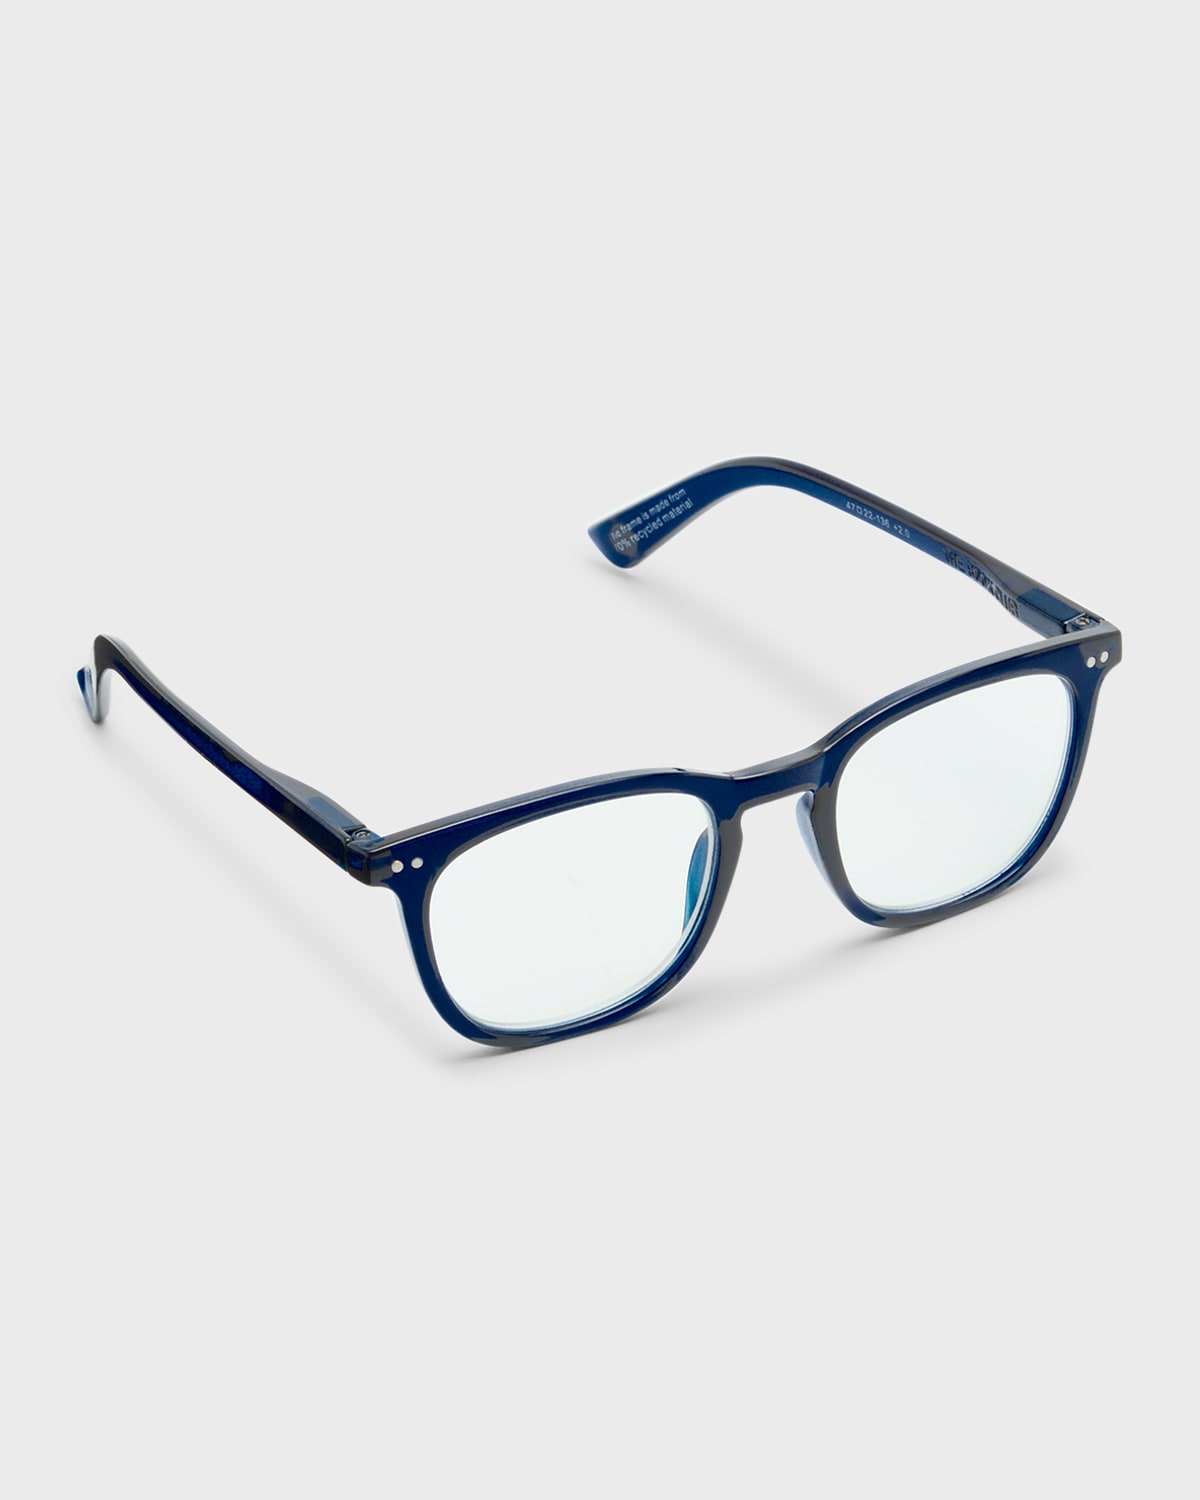 The Whirl Acetate Square Reading Glasses